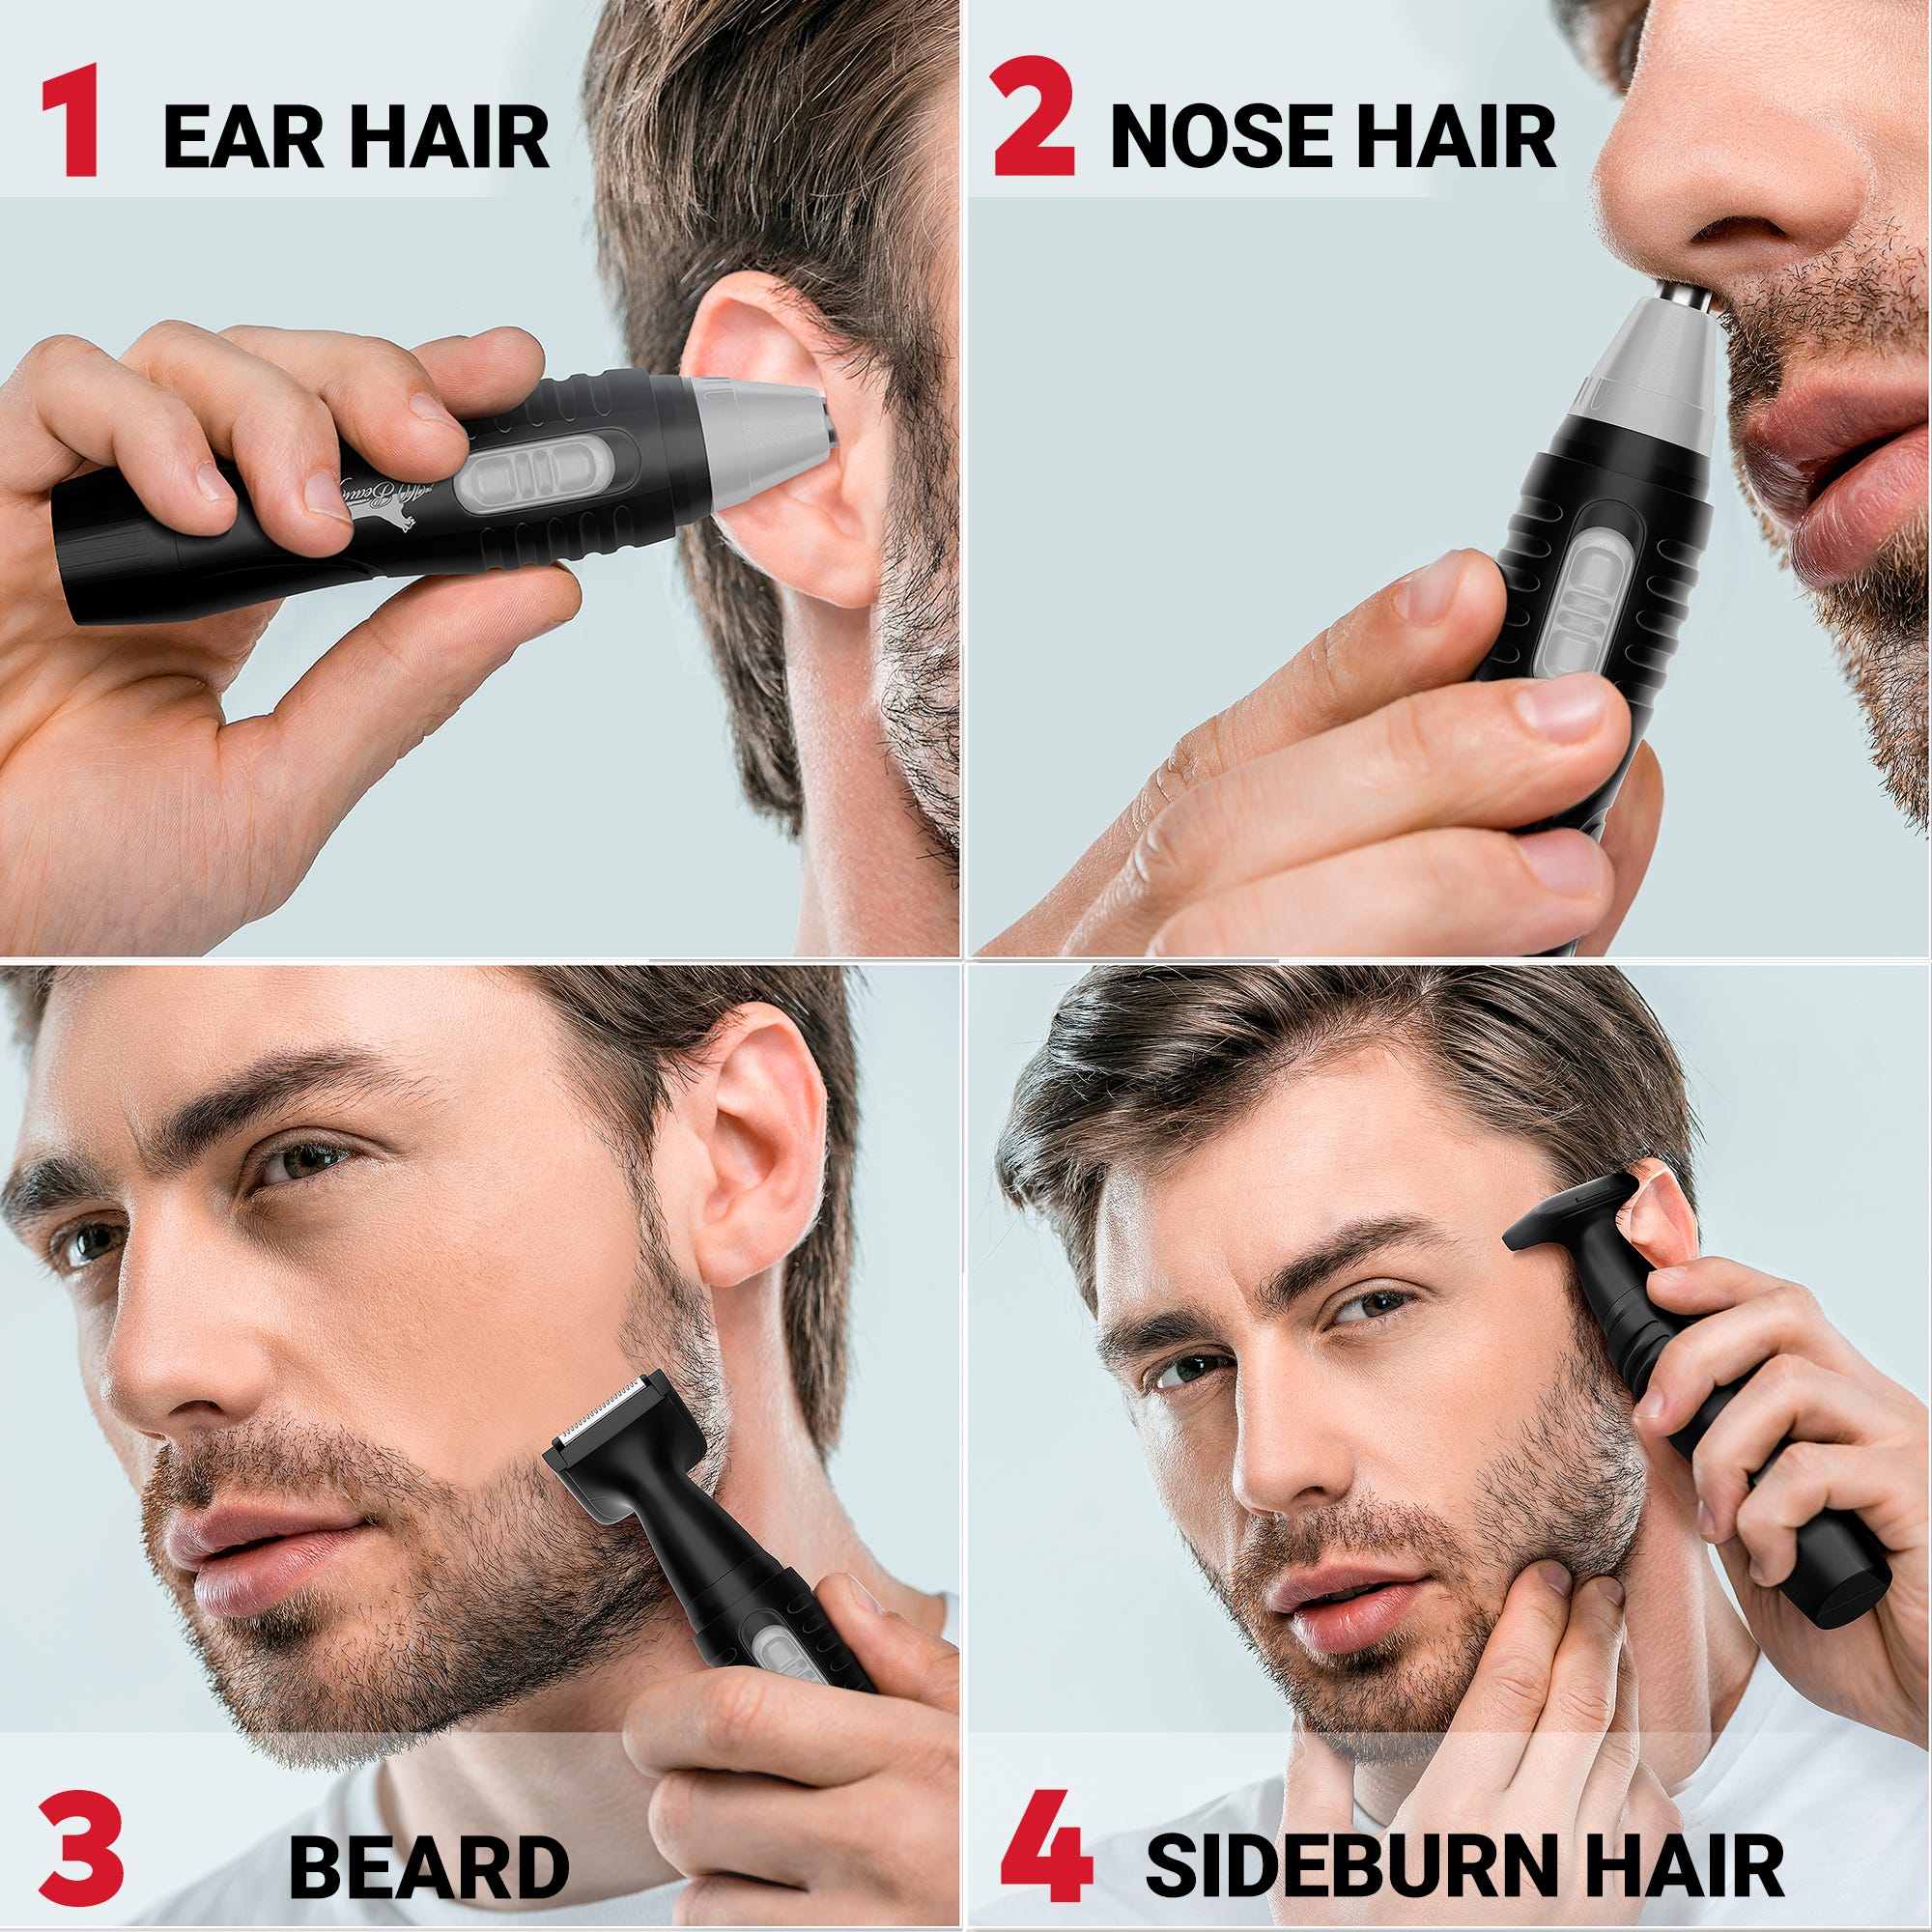 nose hair trimmer before and after